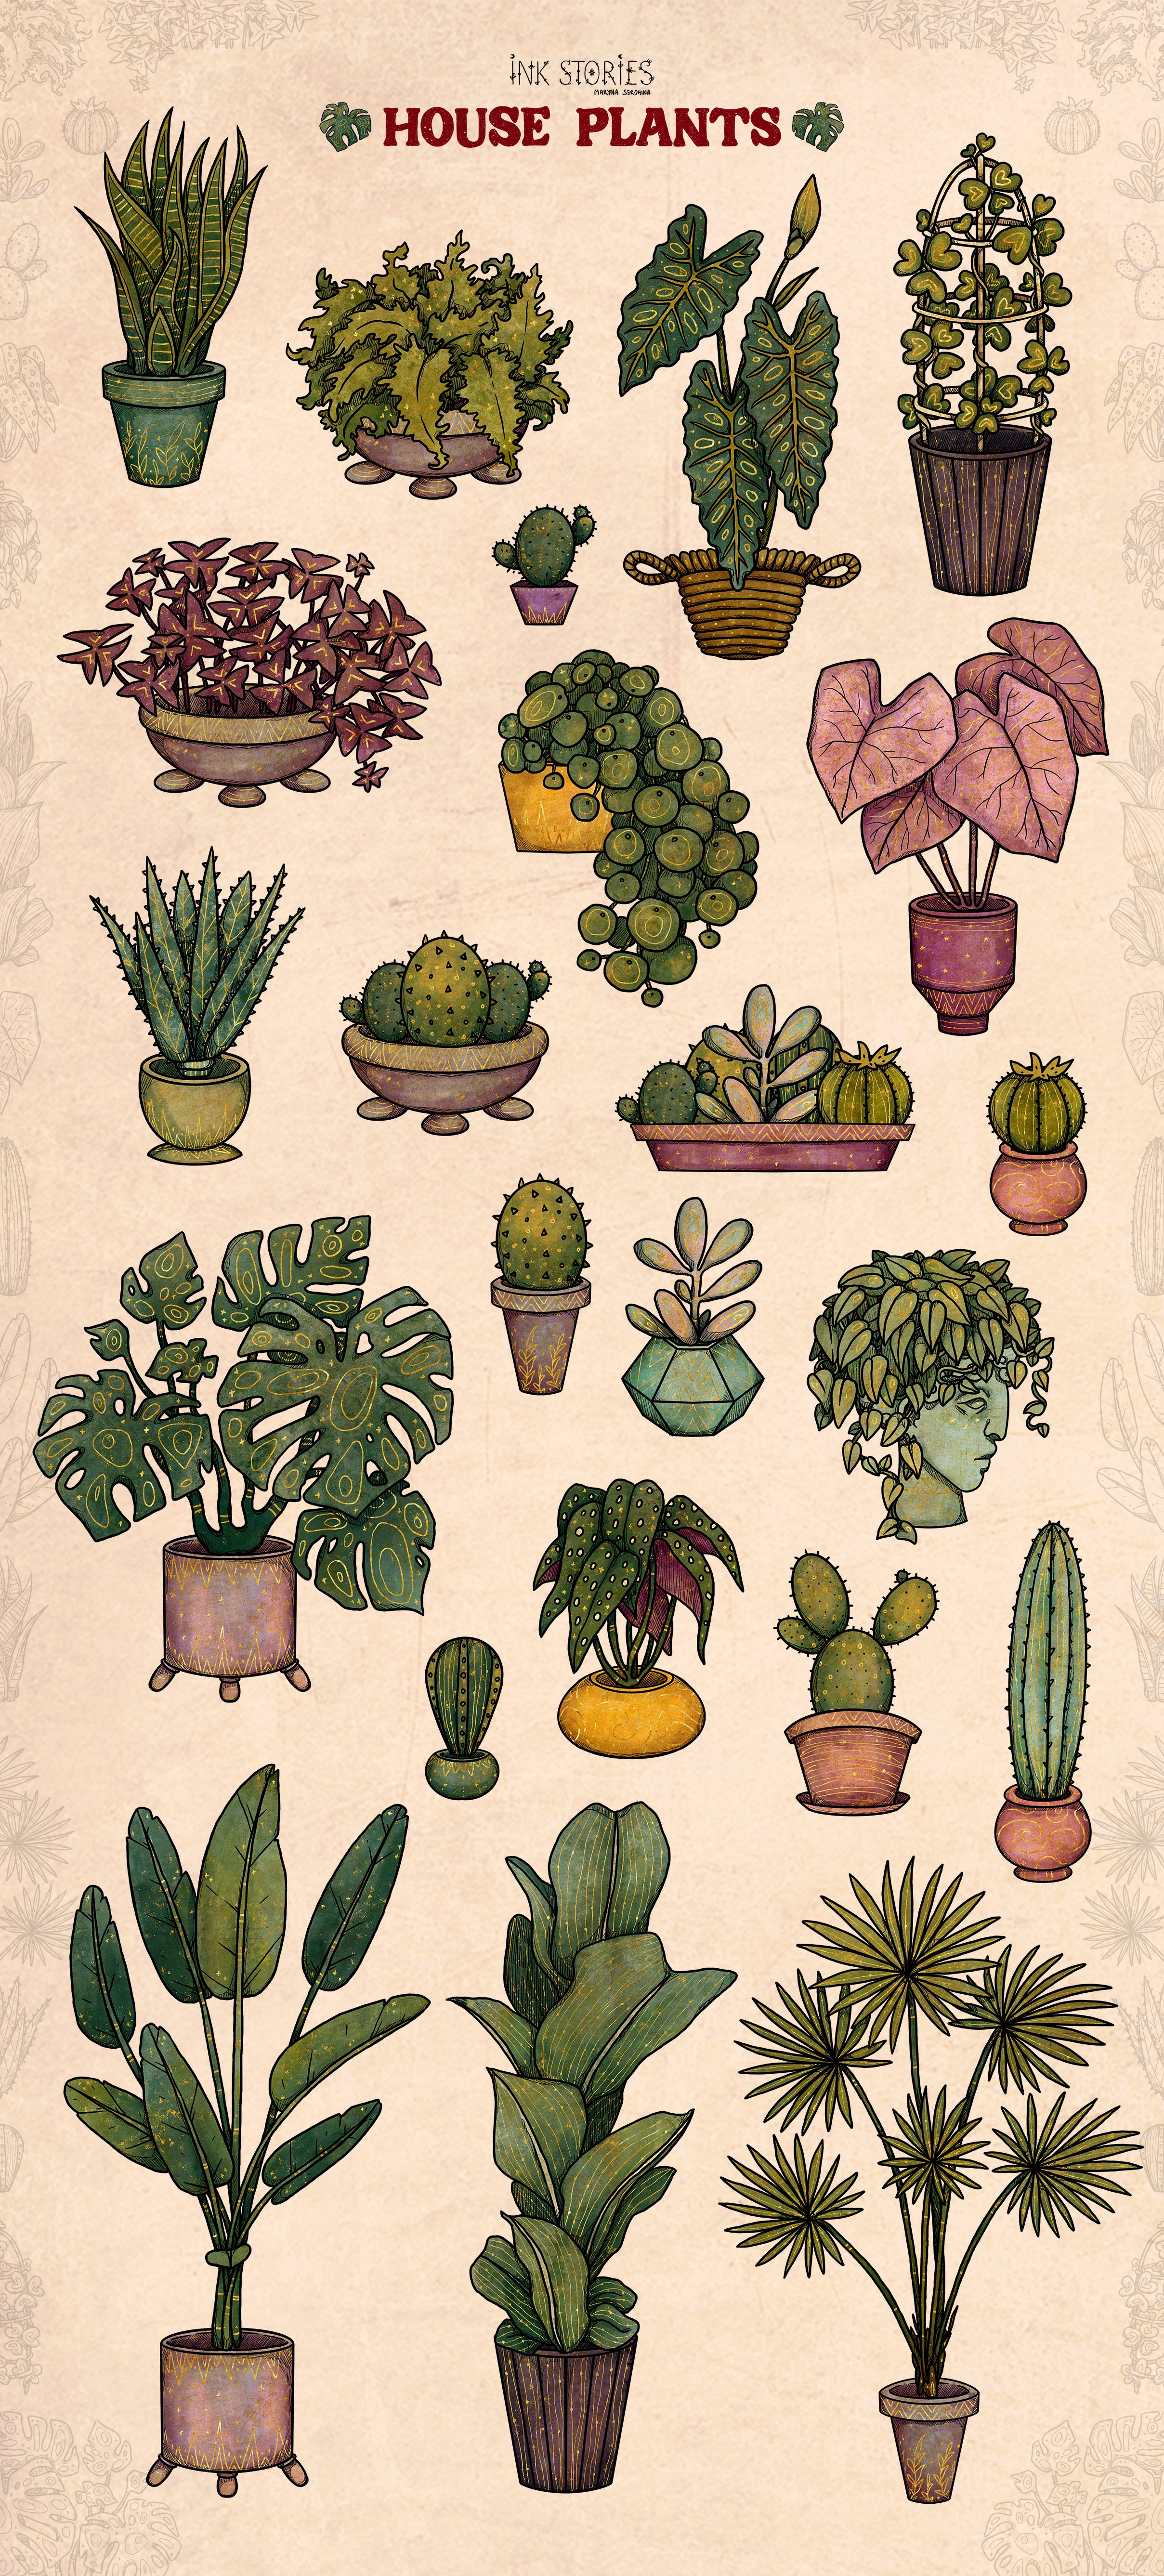 House Plants preview image.